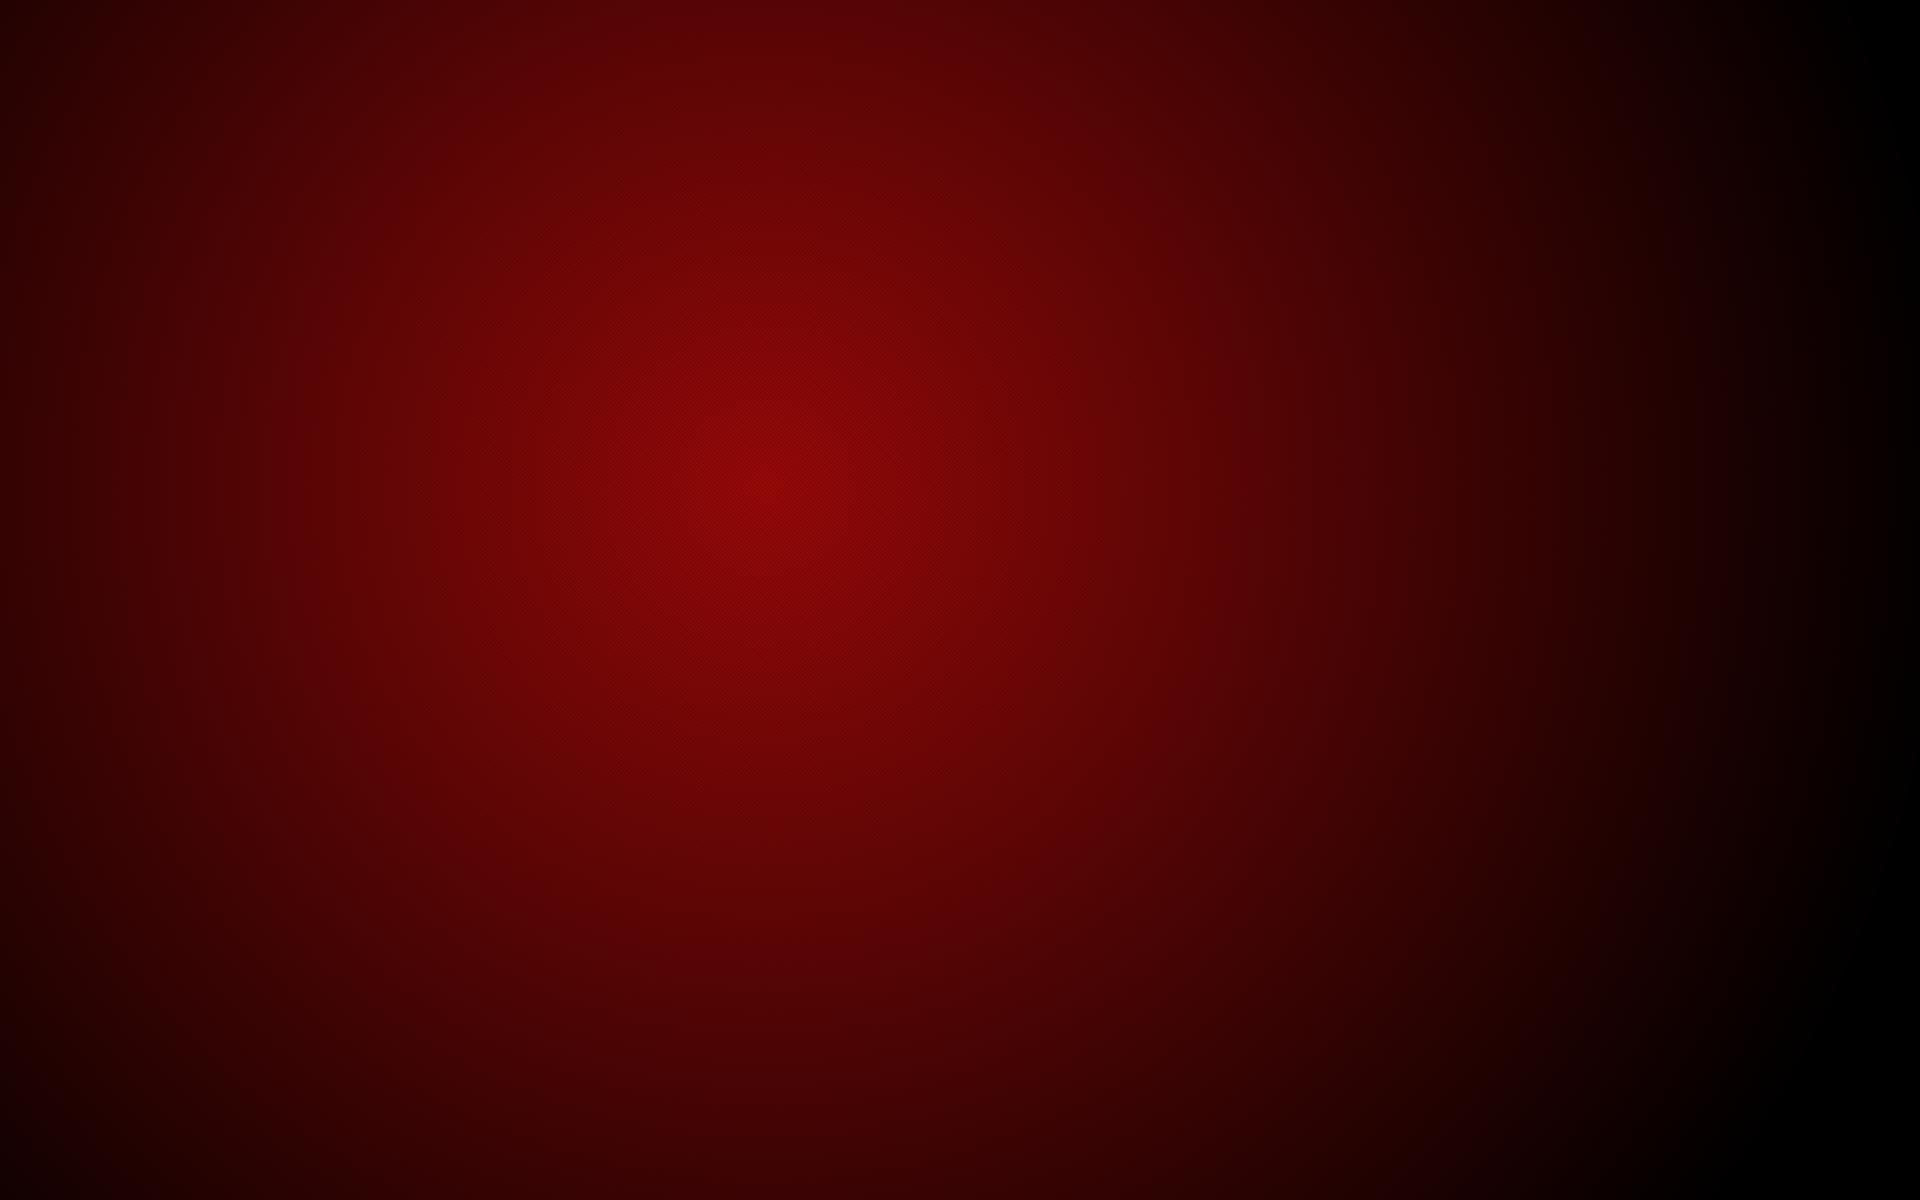 Image for Gadgets: Plain Red